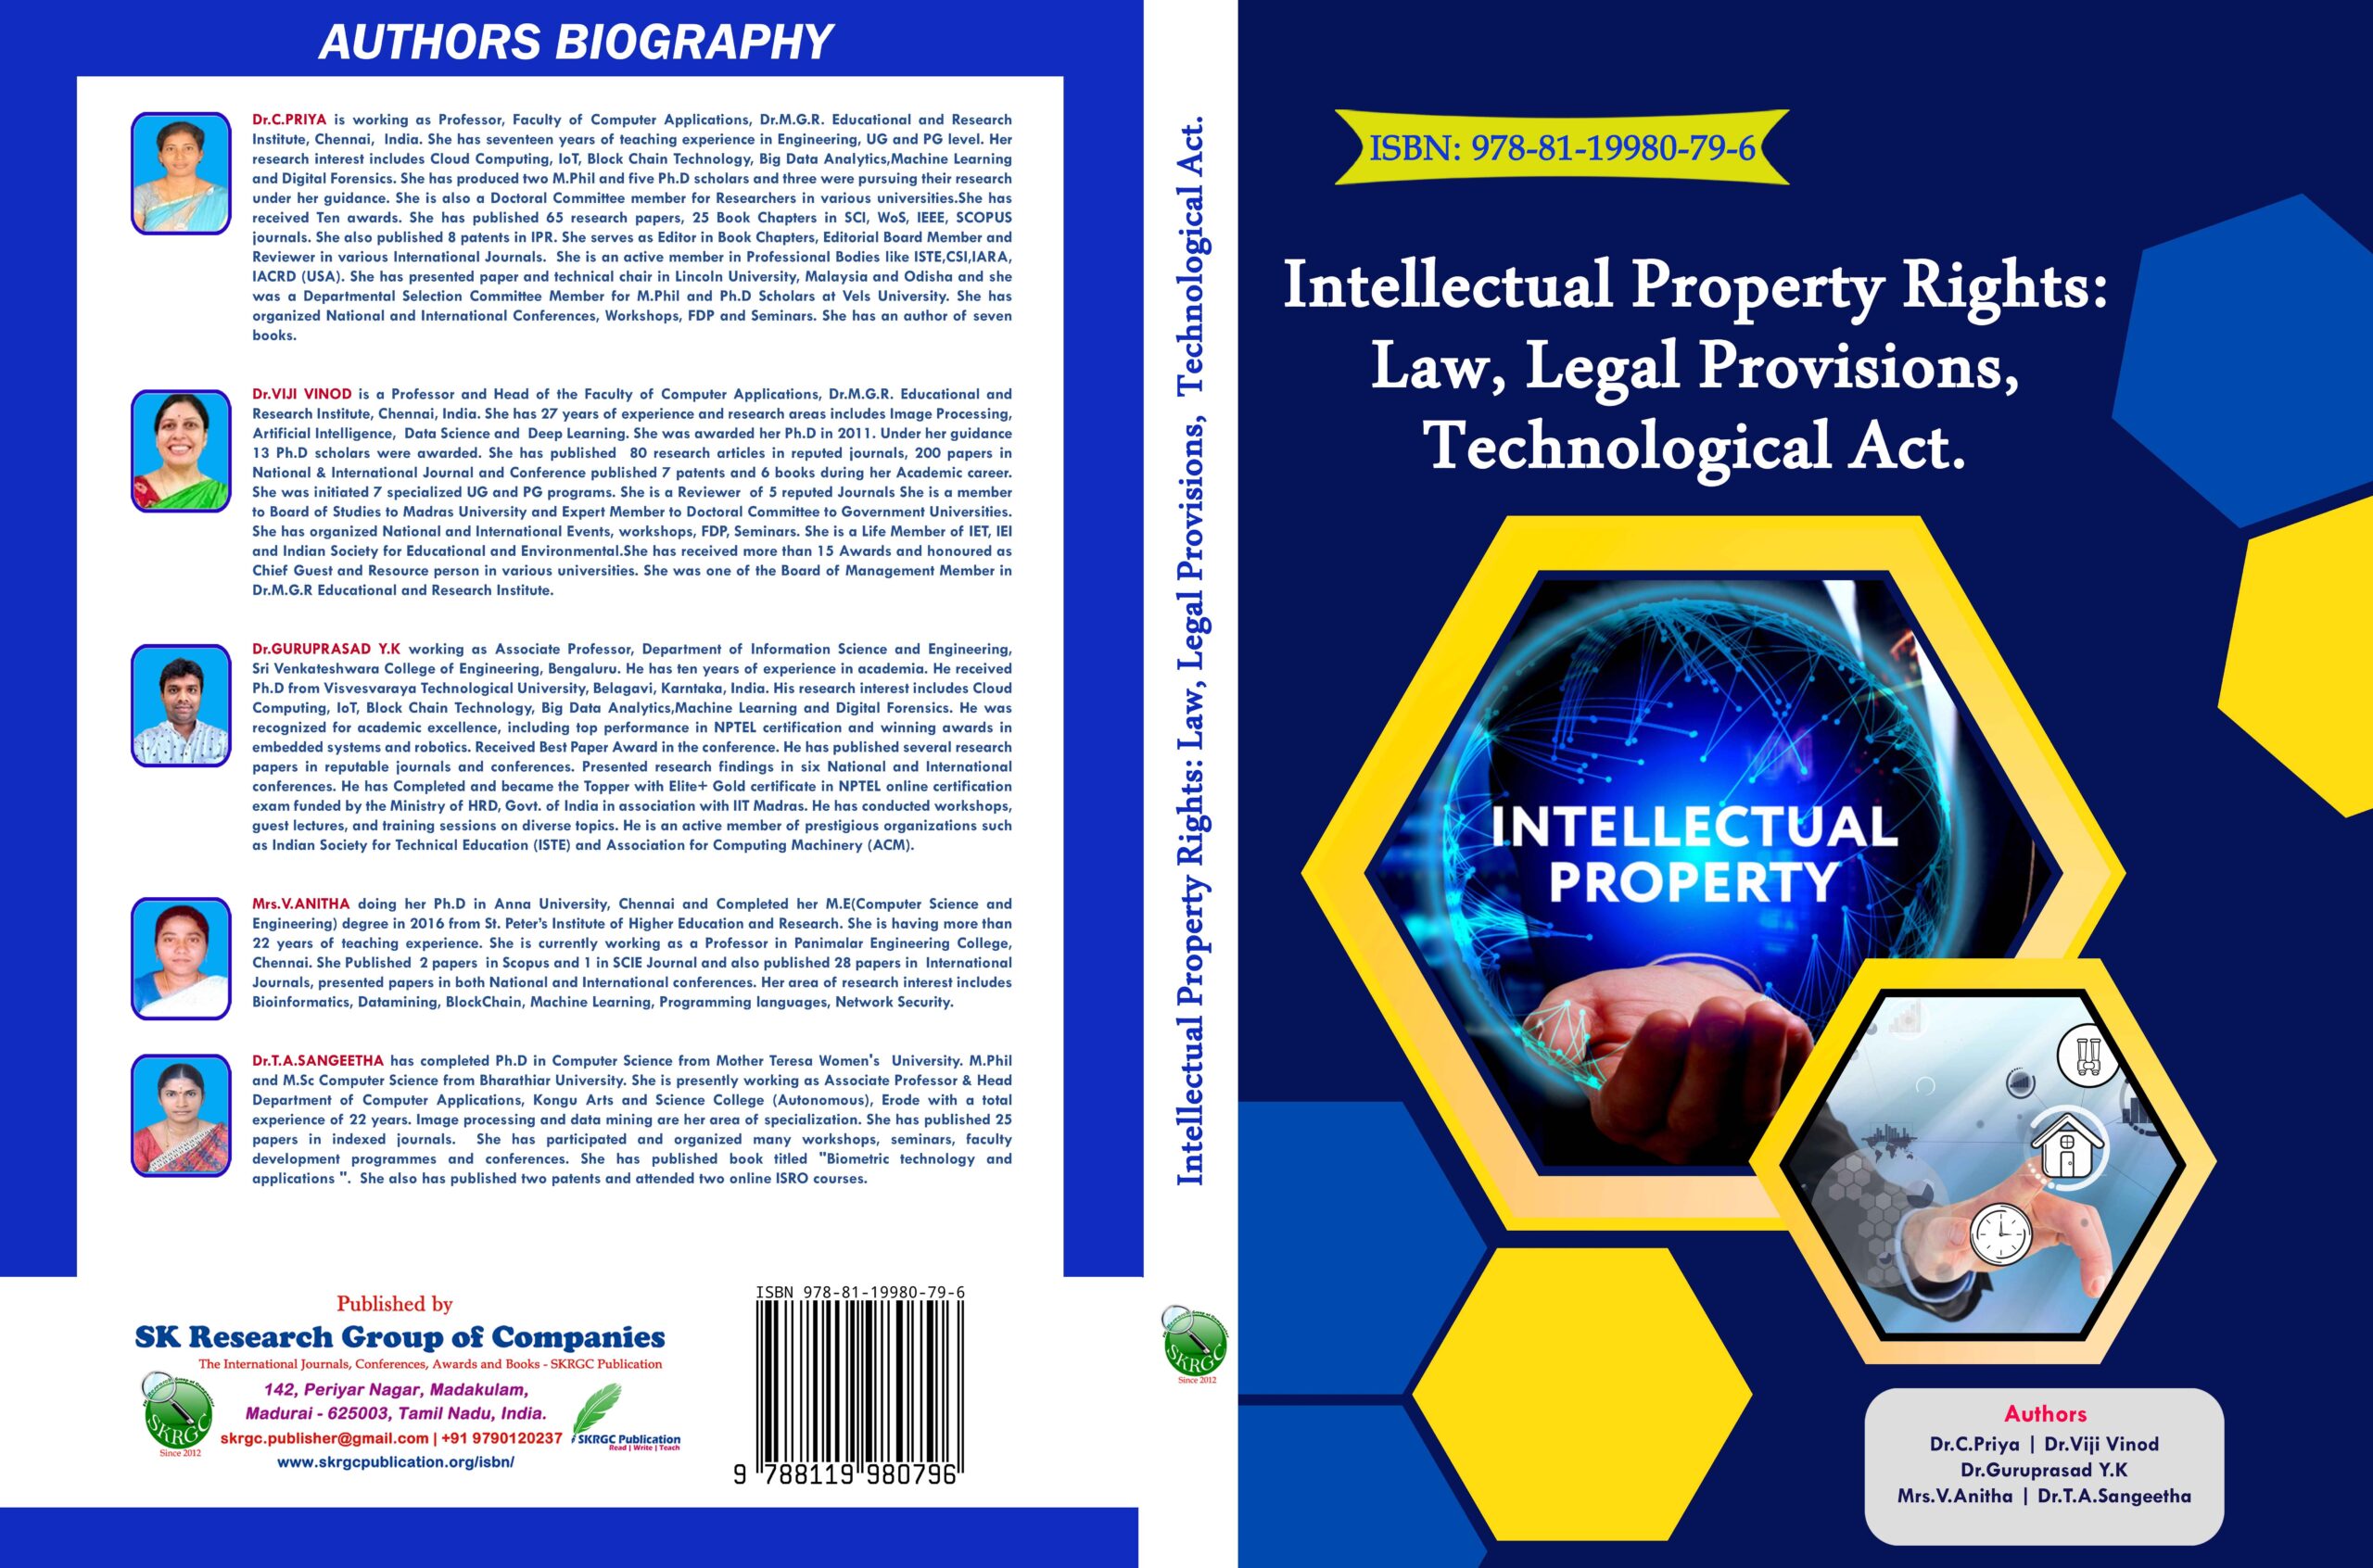 Intellectual Property Rights: Law, Legal Provisions, Technological Act.